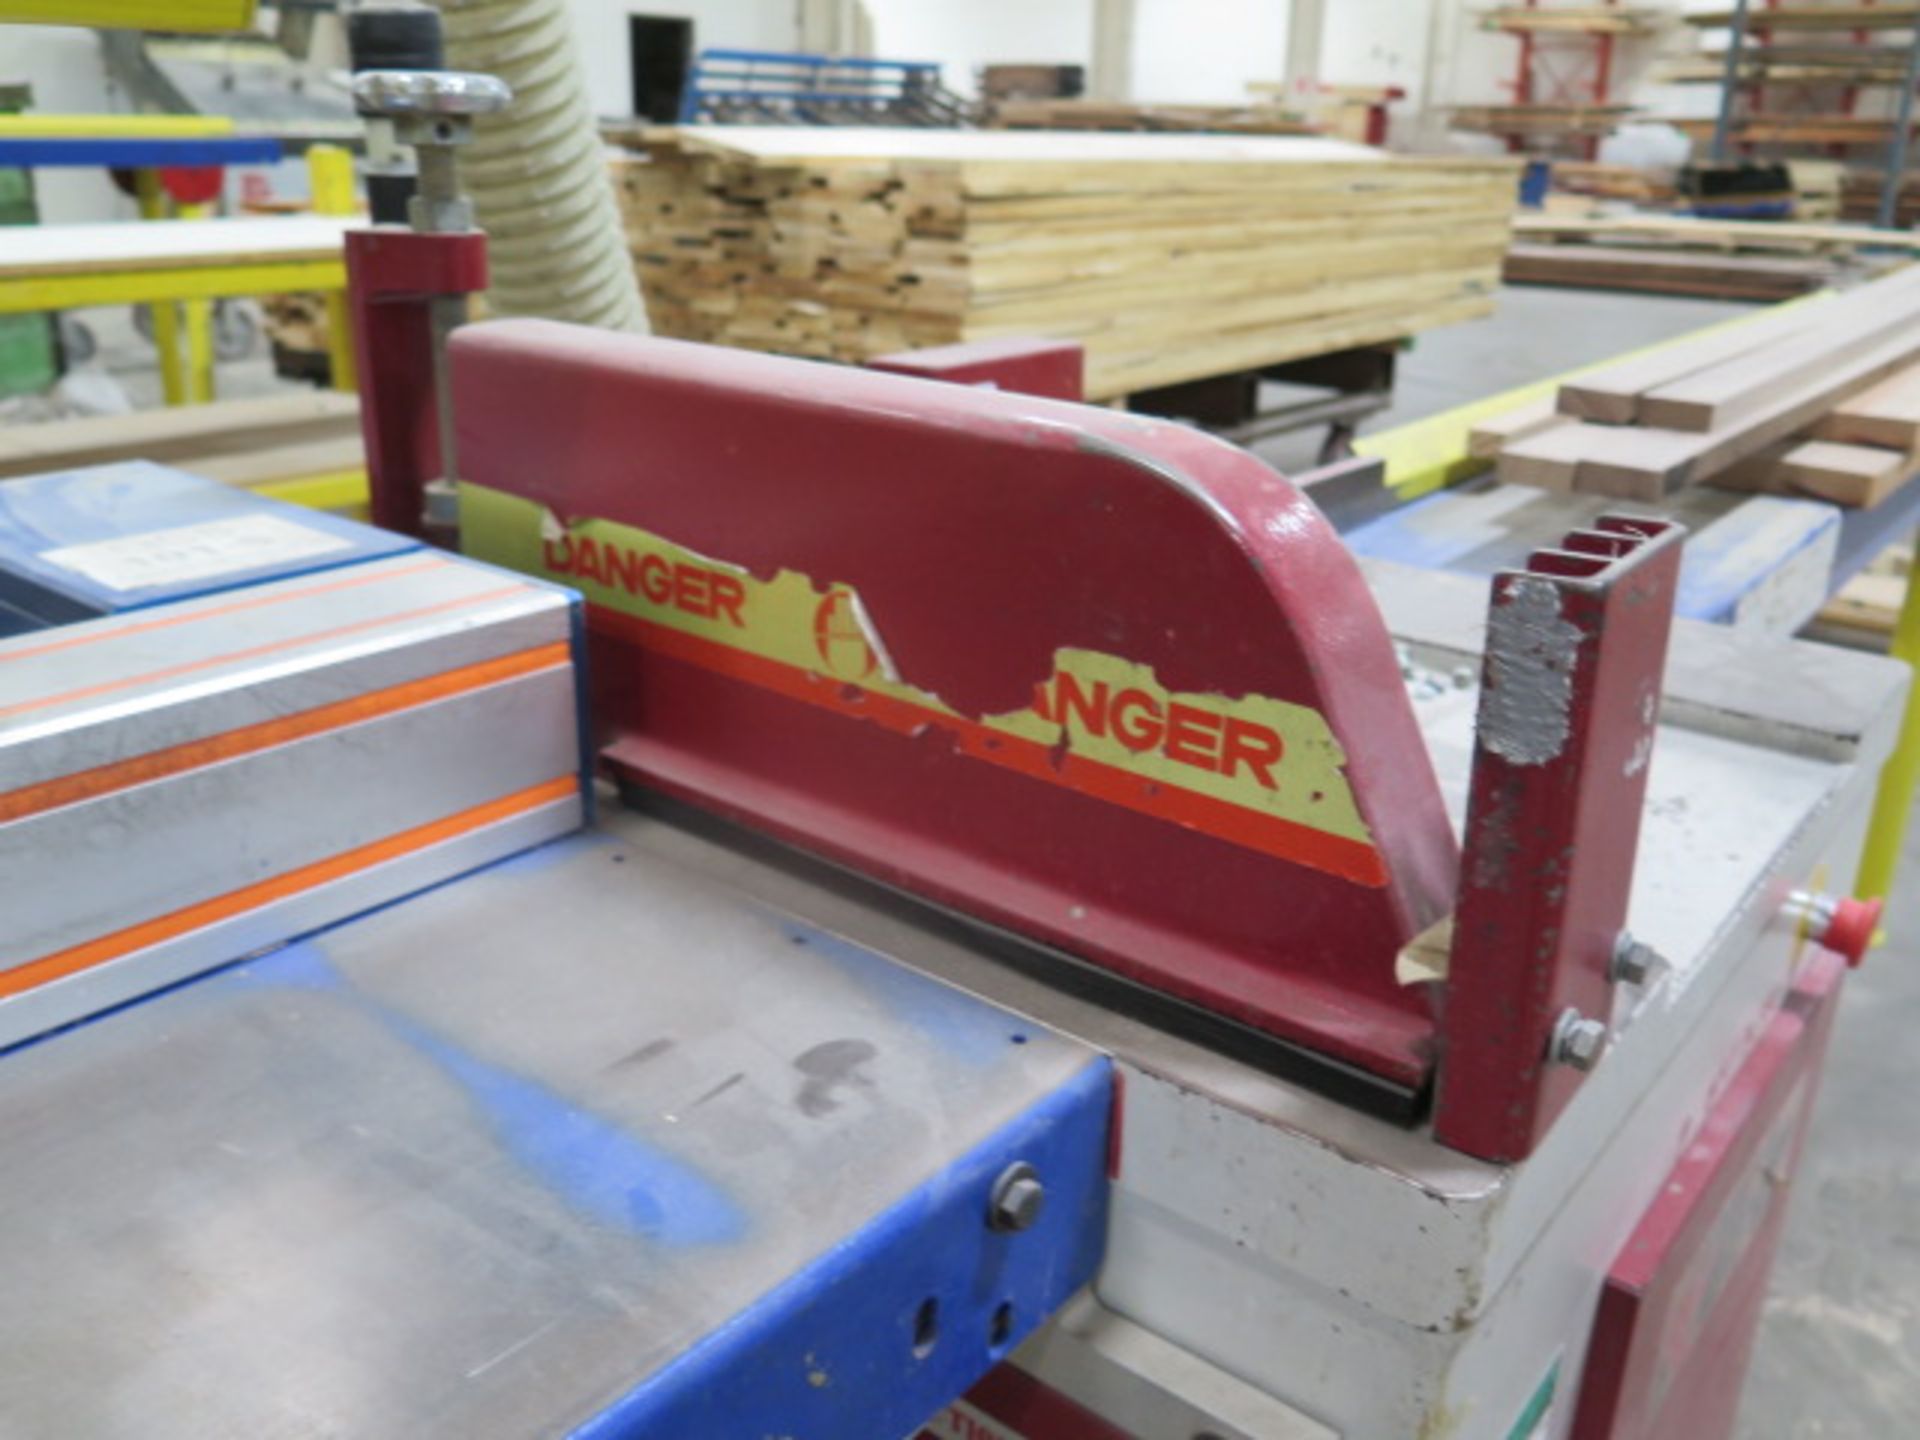 2005 Kufo SK-18CS 18” Up-Acting Pneumatic Cutoff Saw s/n 050907 w/ 10Hp Motor, TigerStop, SOLD AS IS - Image 6 of 14